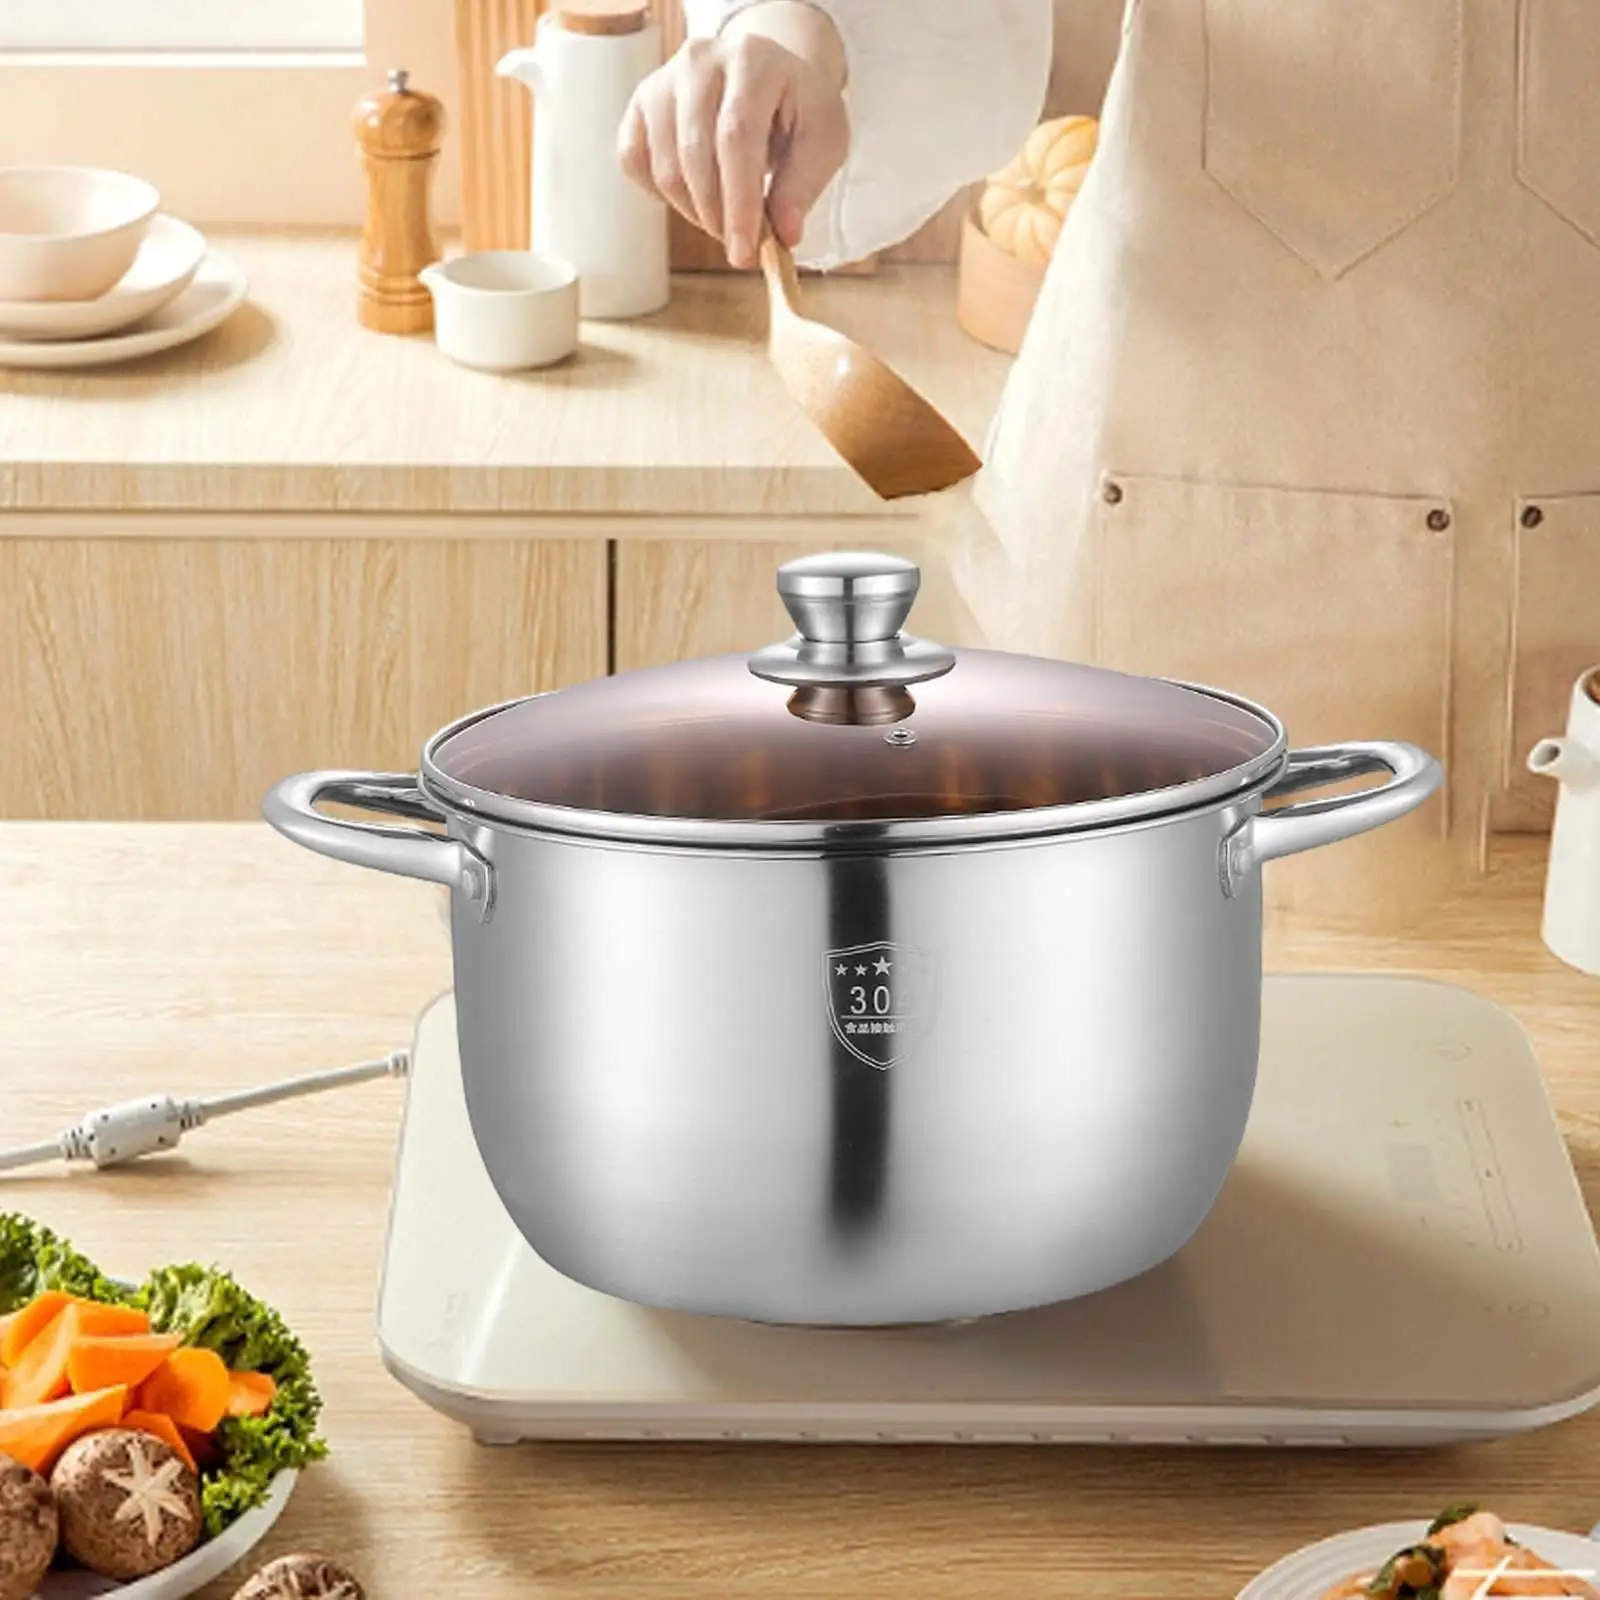 Stainless Steel Stockpot with Lid Kitchen Cooking Pot for Soup Eggs Meat